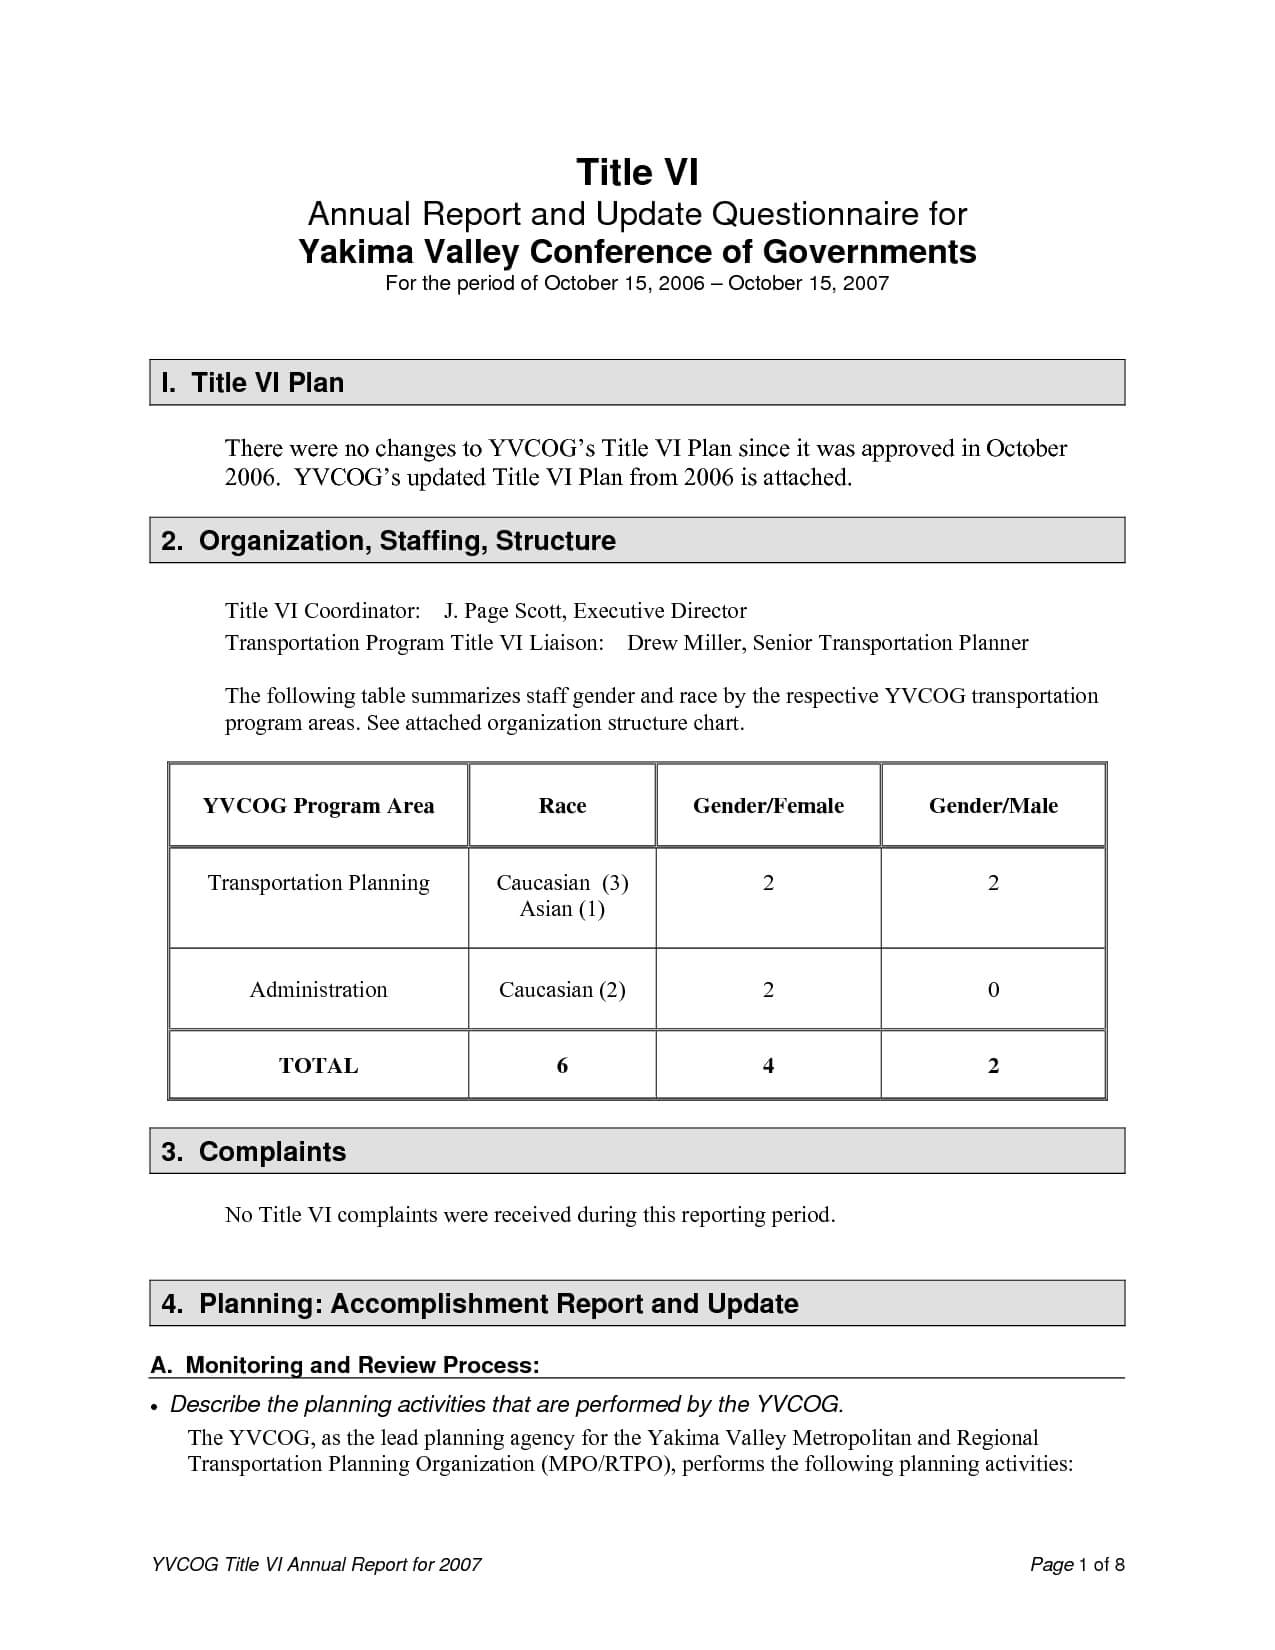 Accomplishment Report Format For Business Or Organizations Throughout Weekly Accomplishment Report Template